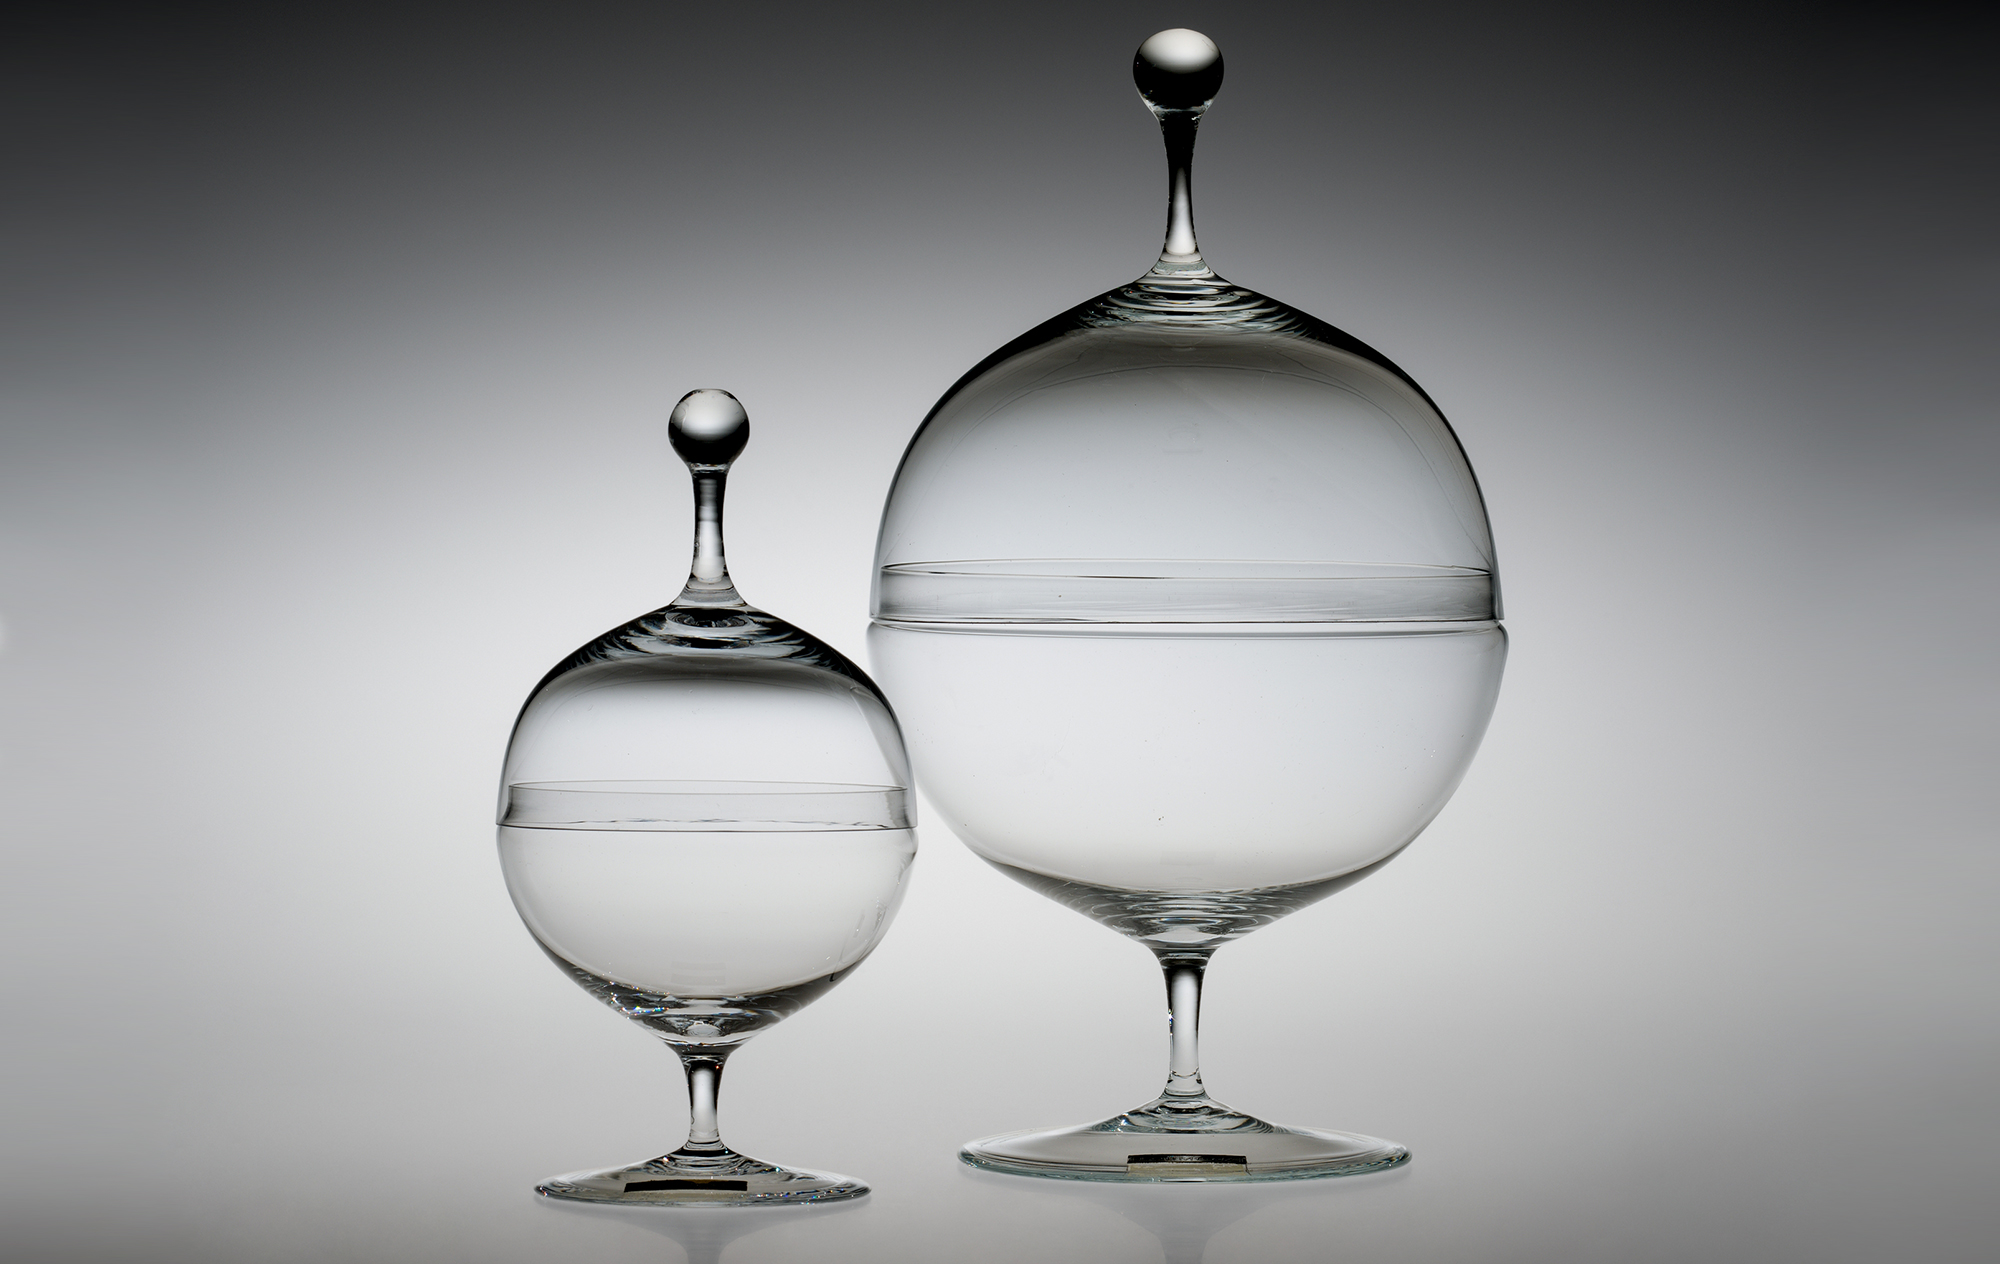 Candy Dishes, designed 1925. Designed by Oswald Haerdtl (Austrian, 1899–1959); manufactured by J. & L. Lobmeyr. Mold-blown and hot-worked Muslin glass. H. 22.9 cm, Diam. 12.7 cm; H. 15.3 cm, Diam. 7.7 cm. The Corning Museum of Glass (64.3.43).